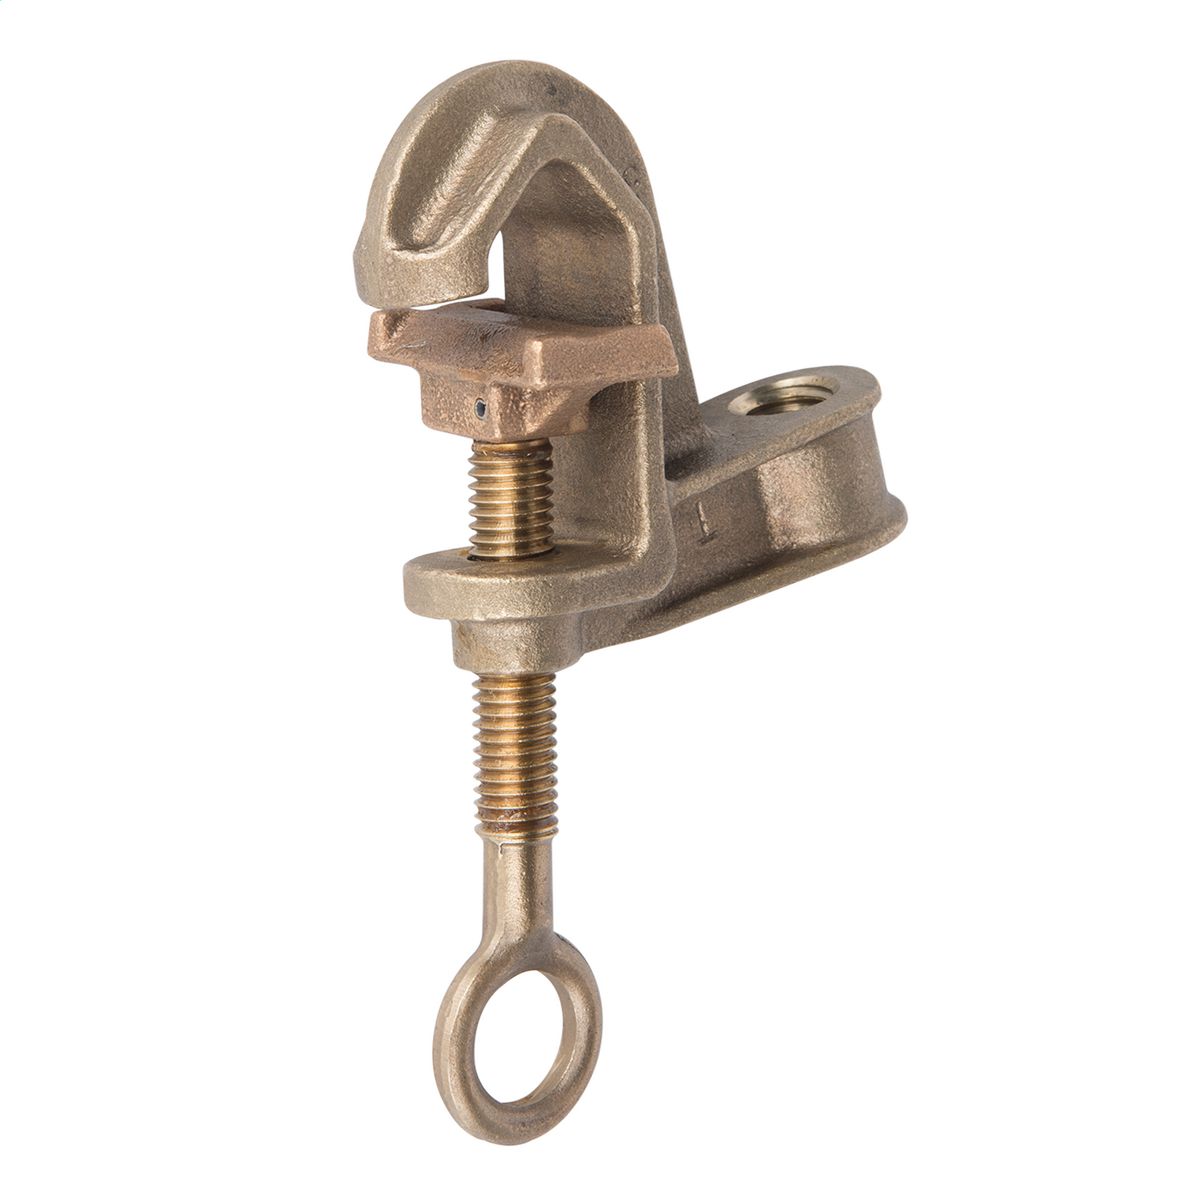 Ground Clamp - C-Type I-A- 2- 0.814" Jaw Opening | "C" Clamp | Clamps